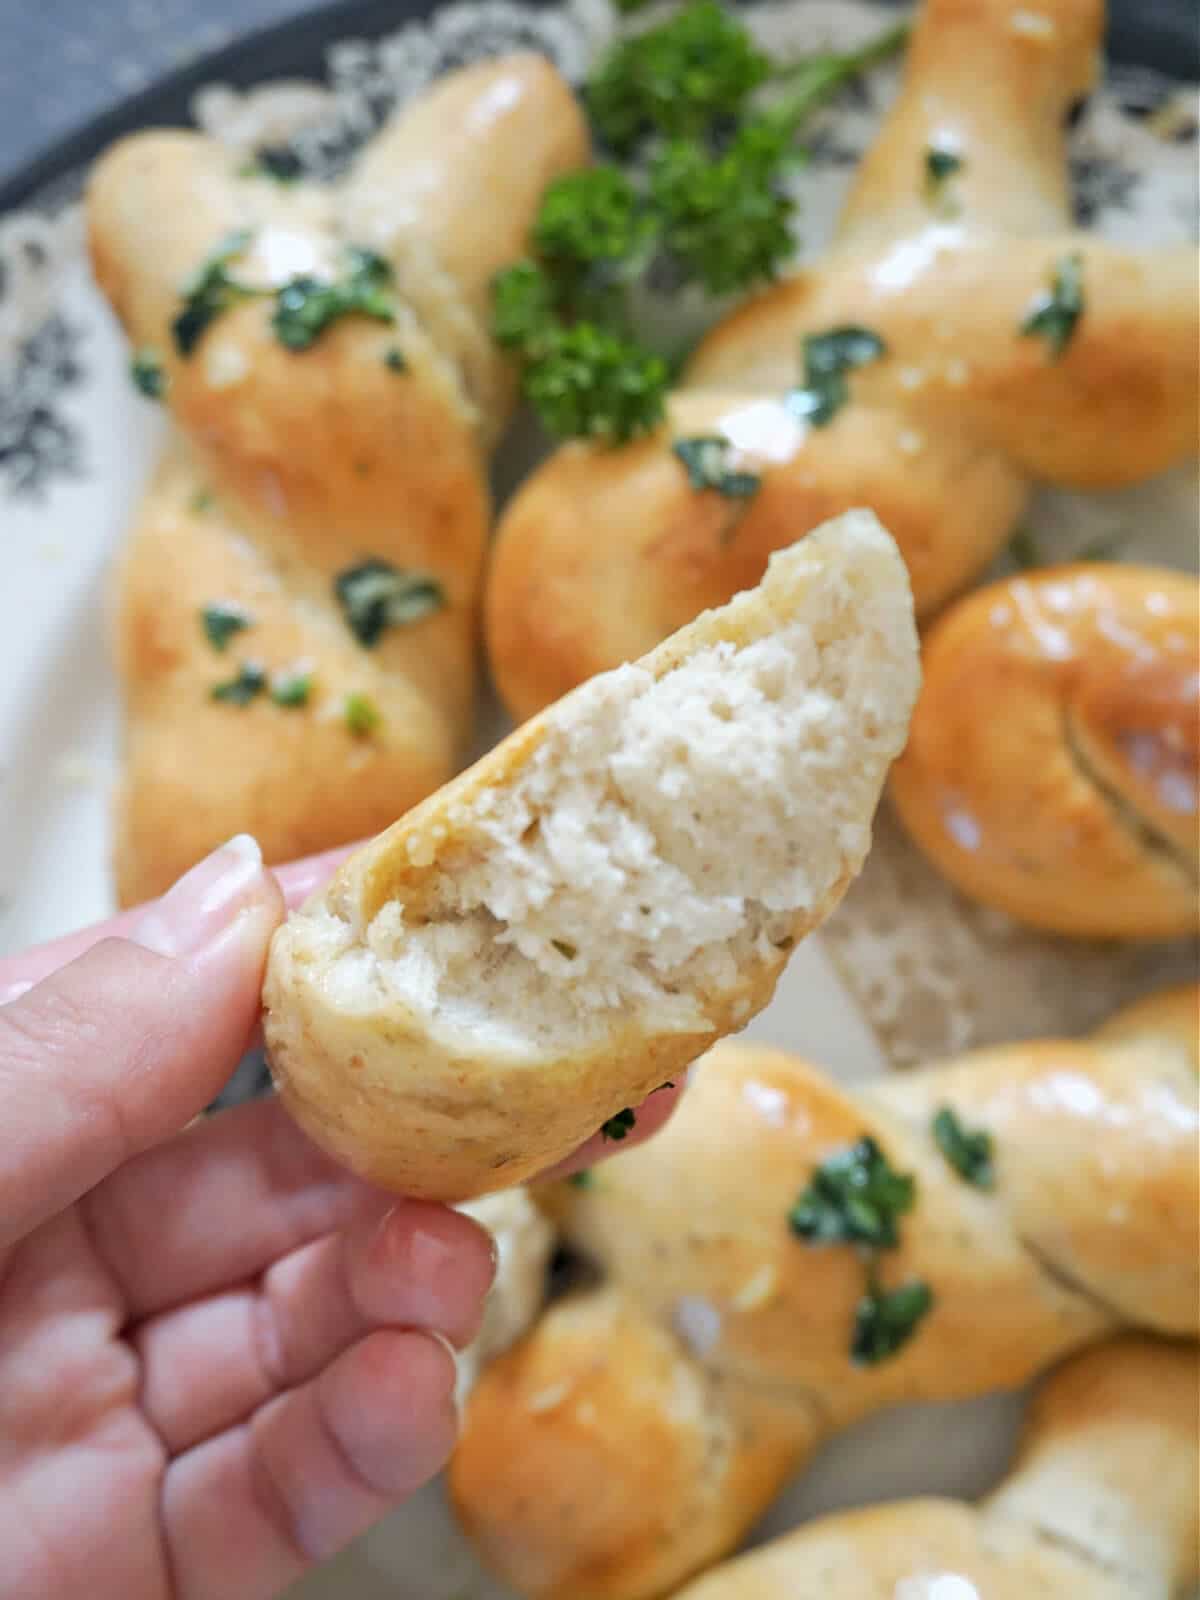 A torn open garlic knot to show how fluffy it is inside